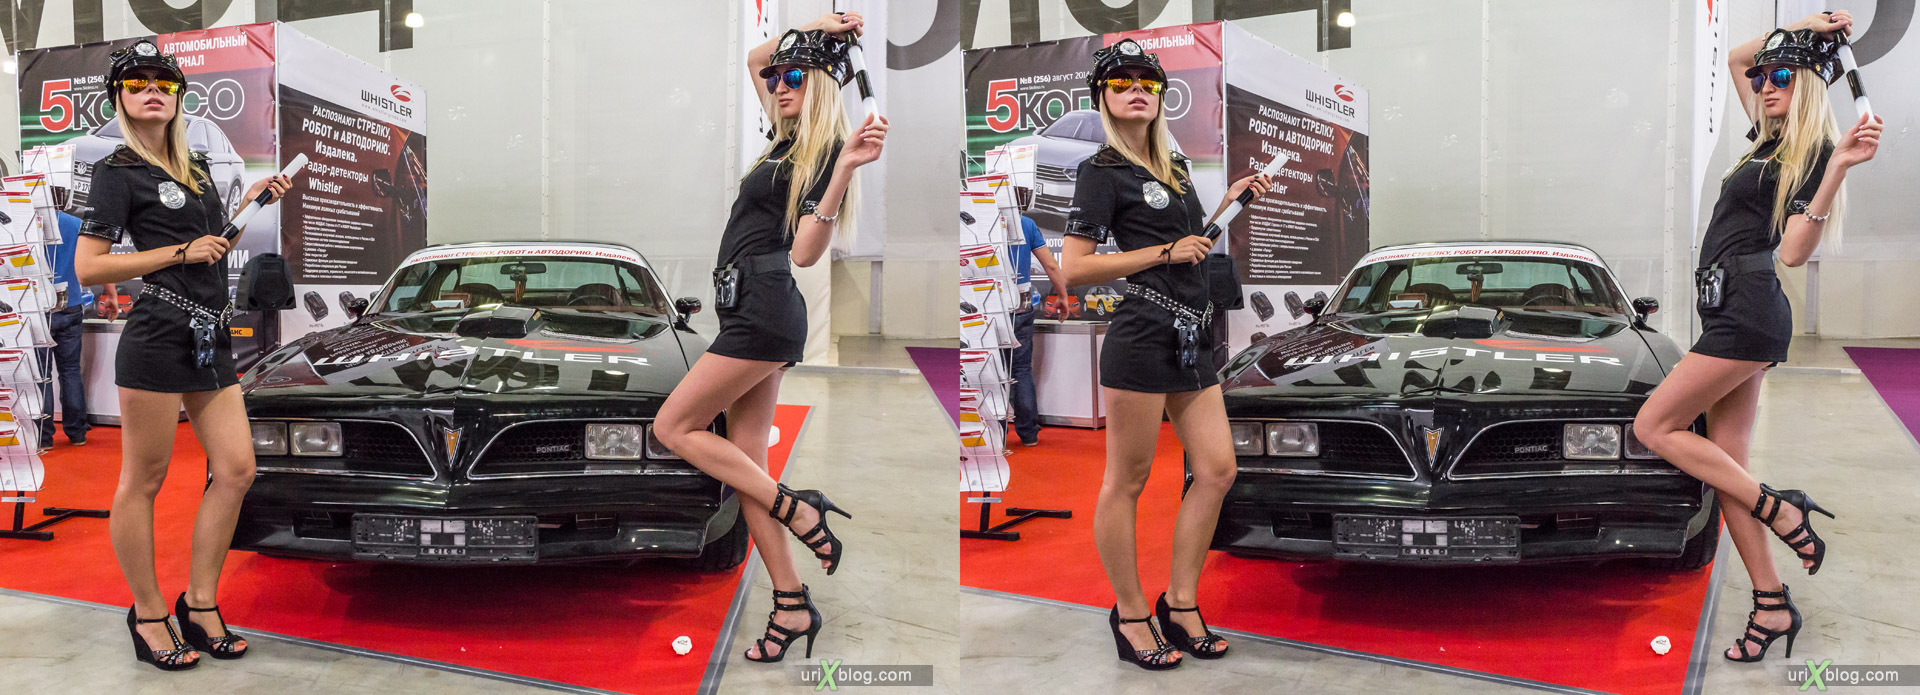 2014, old Pontiac, girls, models, Moscow International Automobile Salon, MIAS, Crocus Expo, Moscow, Russia, augest, 3D, stereo pair, cross-eyed, crossview, cross view stereo pair, stereoscopic